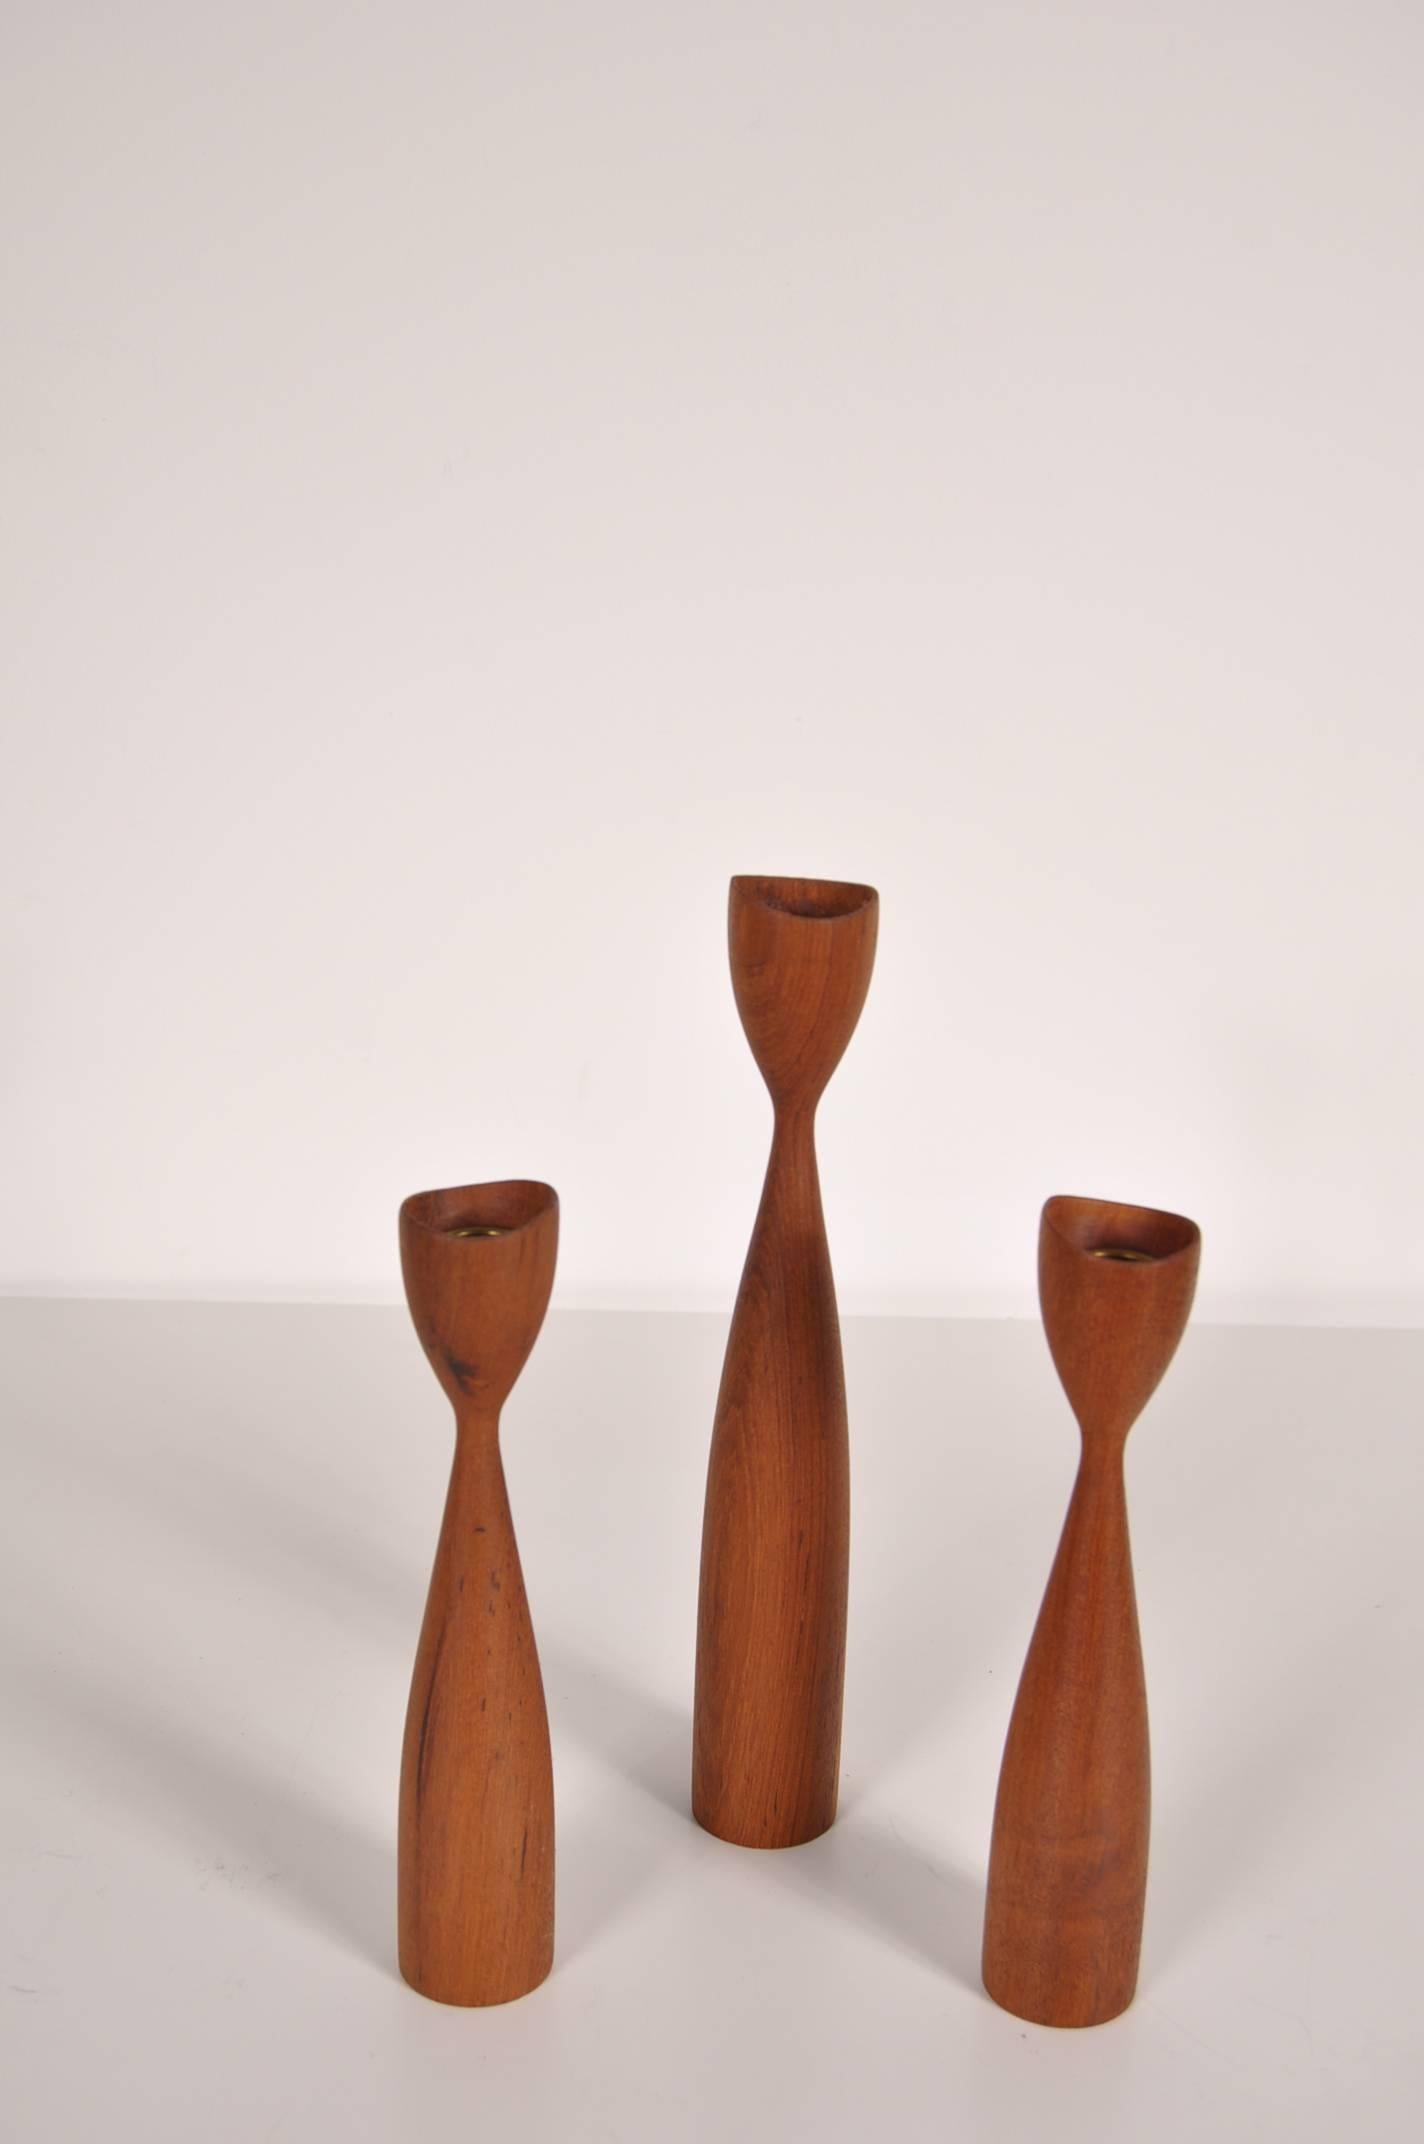 Danish Set of Three Candle Holders in the Style of Rude Osolnik, Denmark, circa 1950